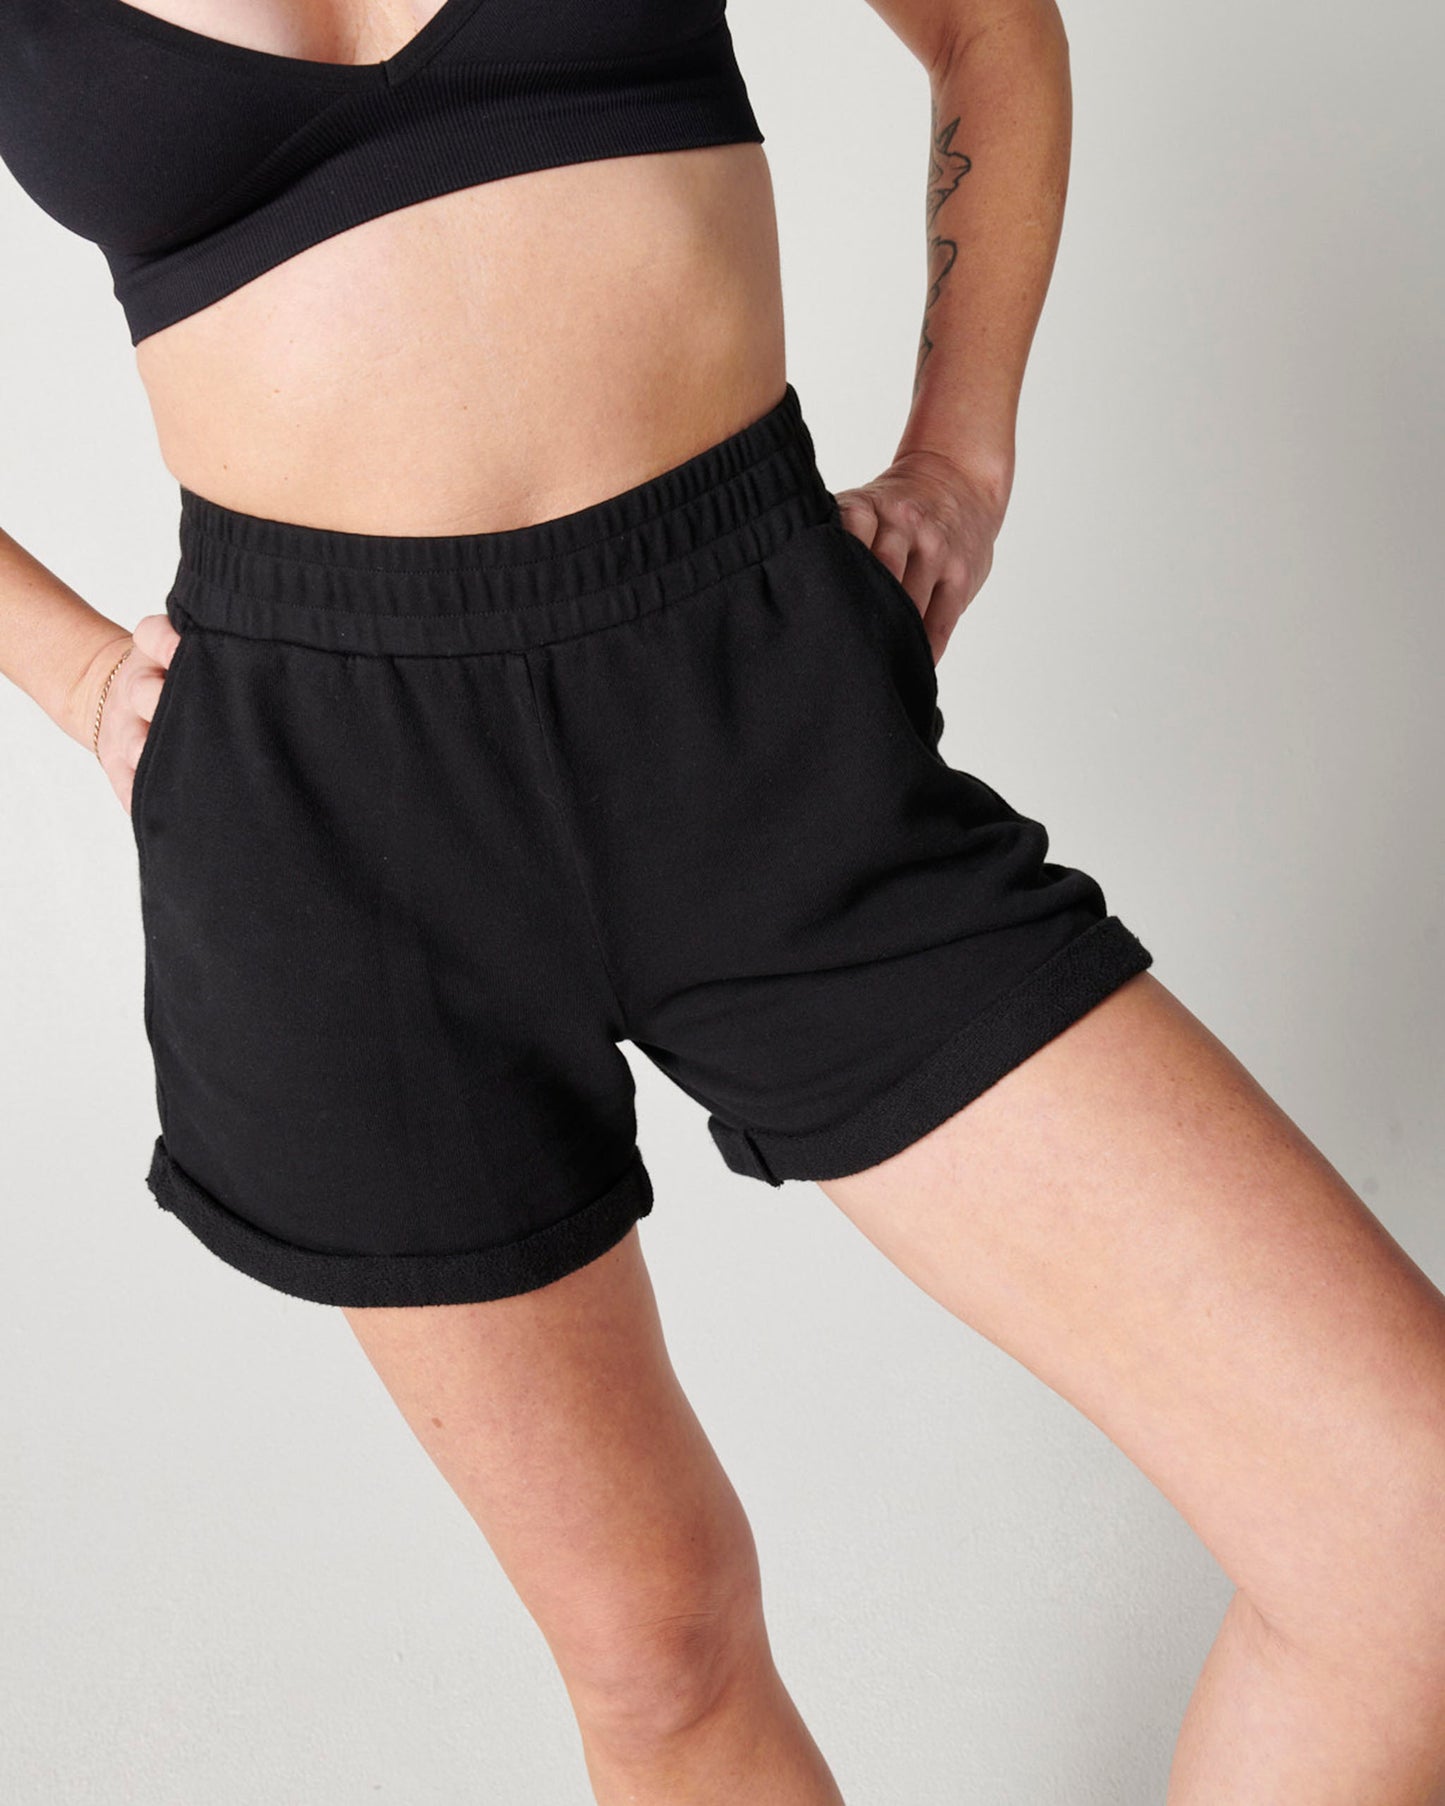 Black organic cotton sweat shorts and black bra on woman's body with hands on hips